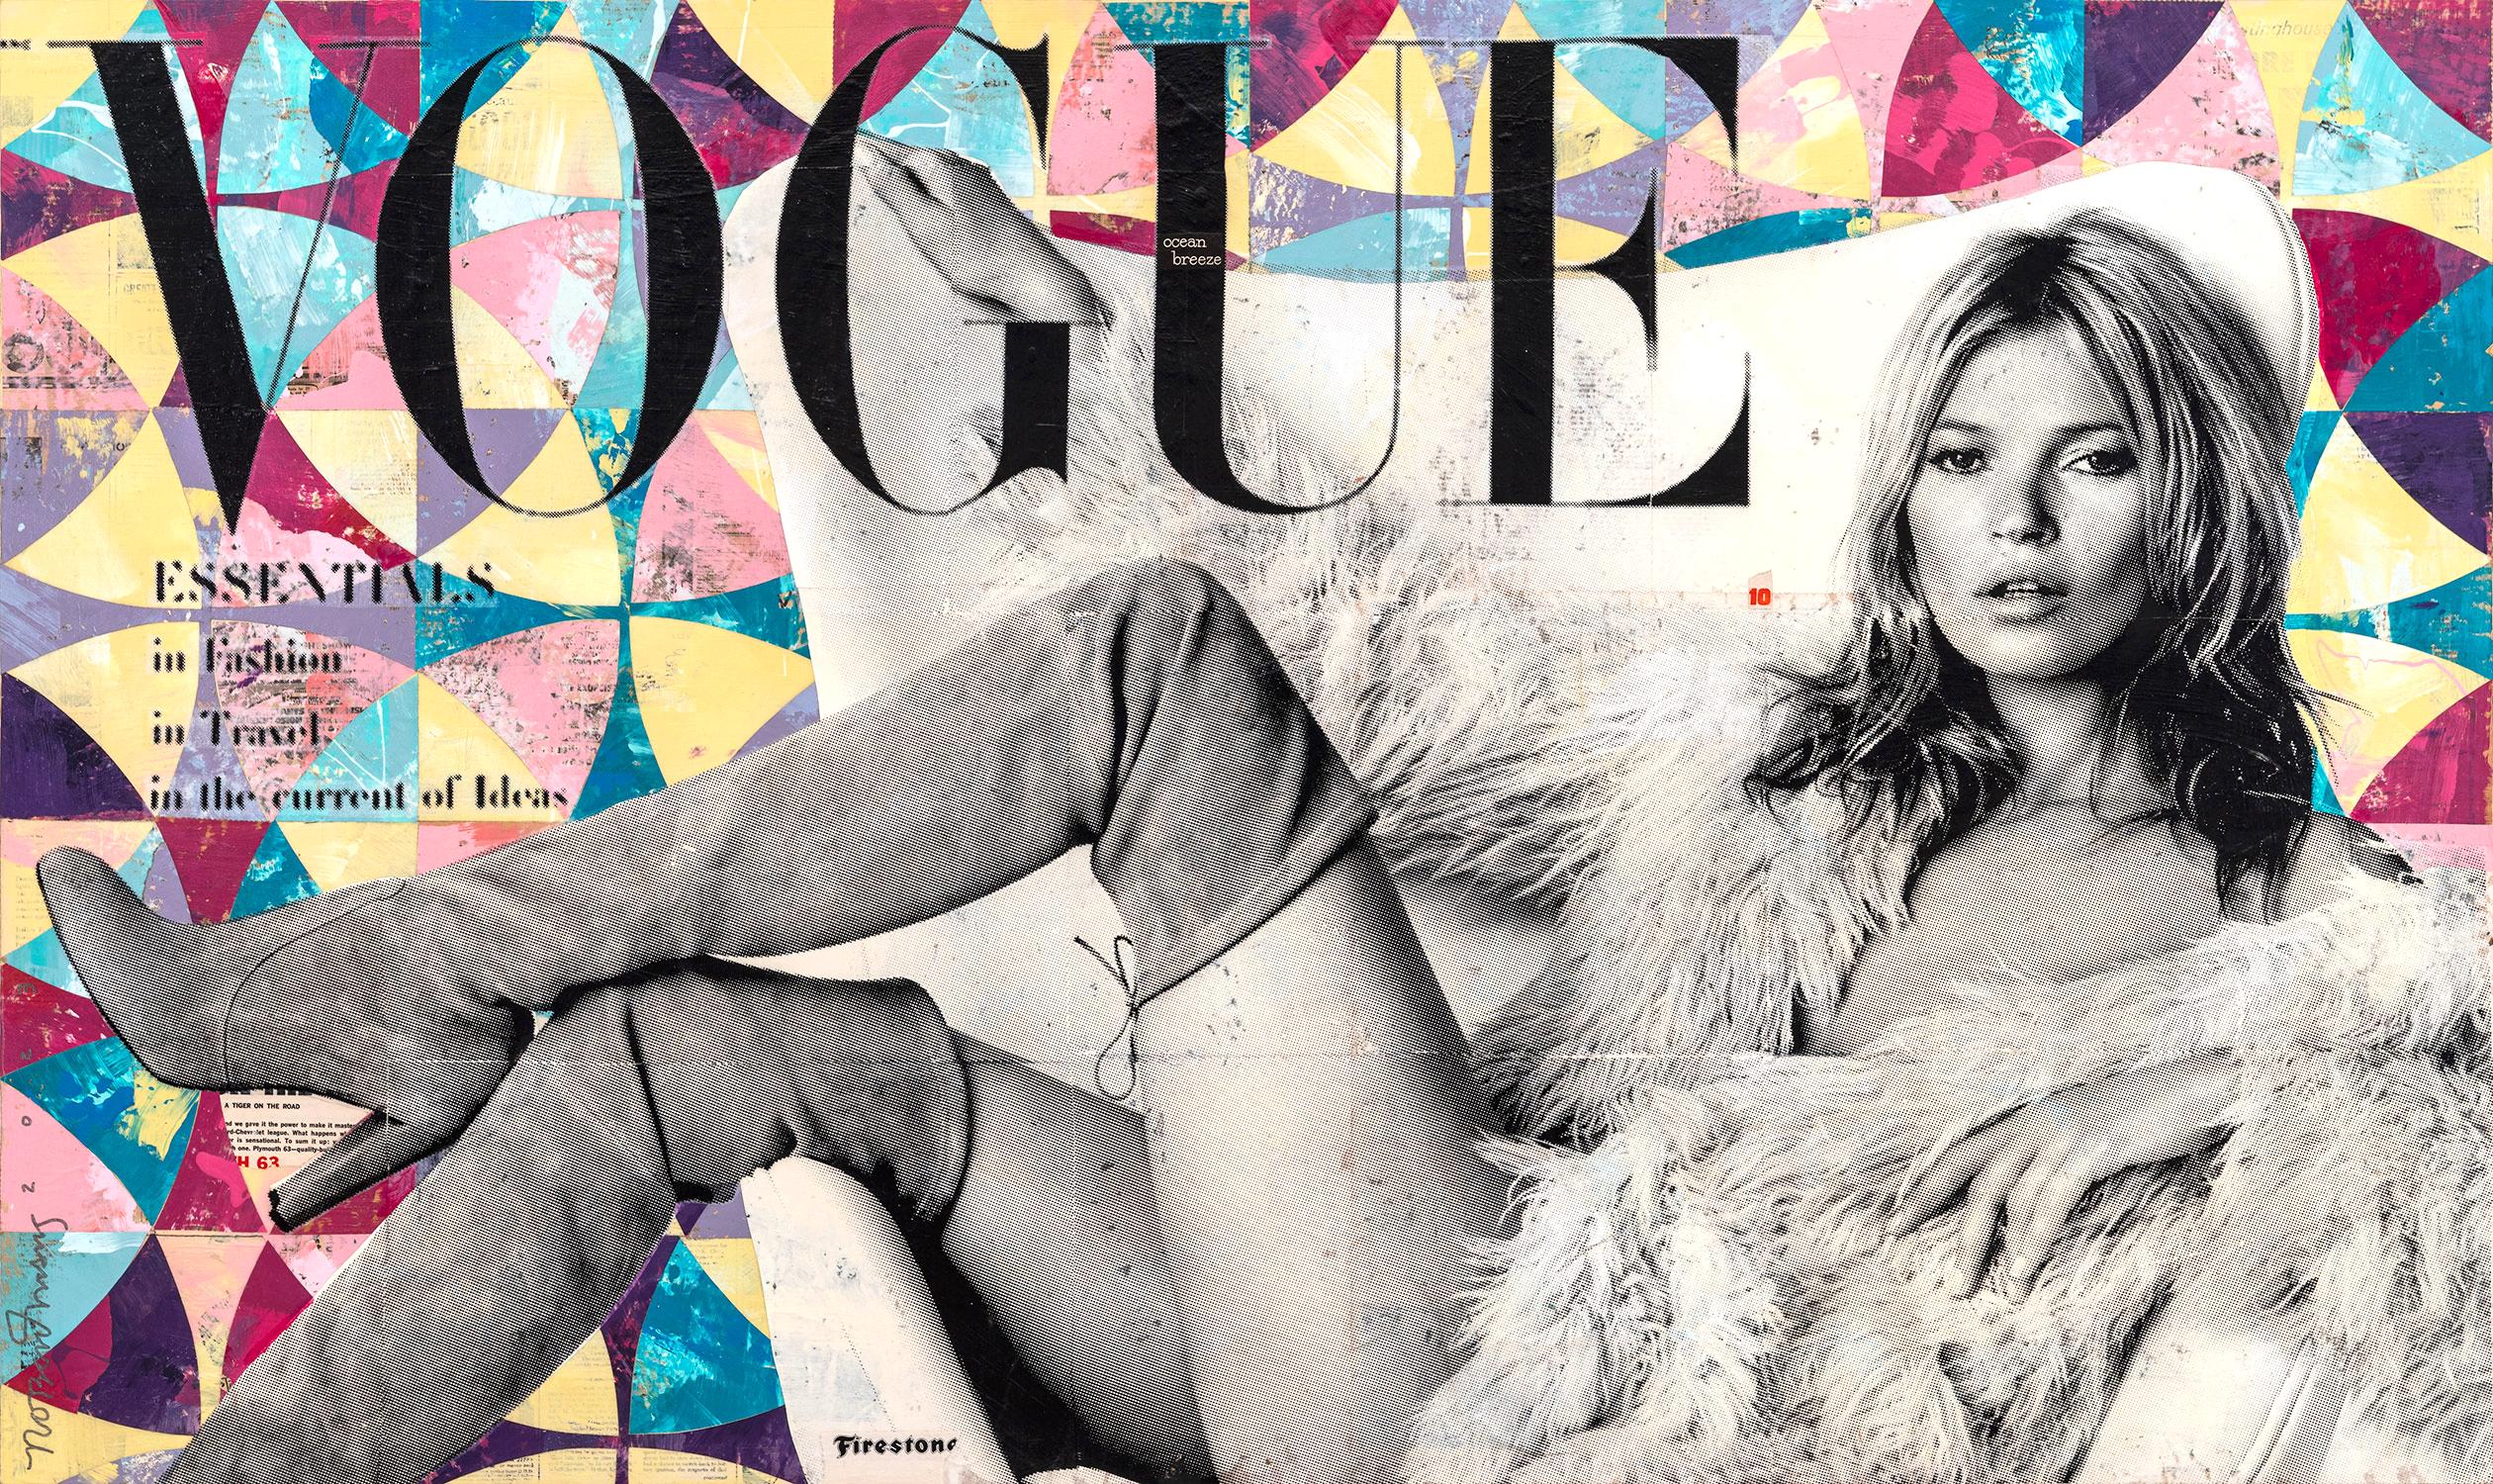 "Fell For You" Kate Moss with Stuart Weitzman Collage Composition sur panneau